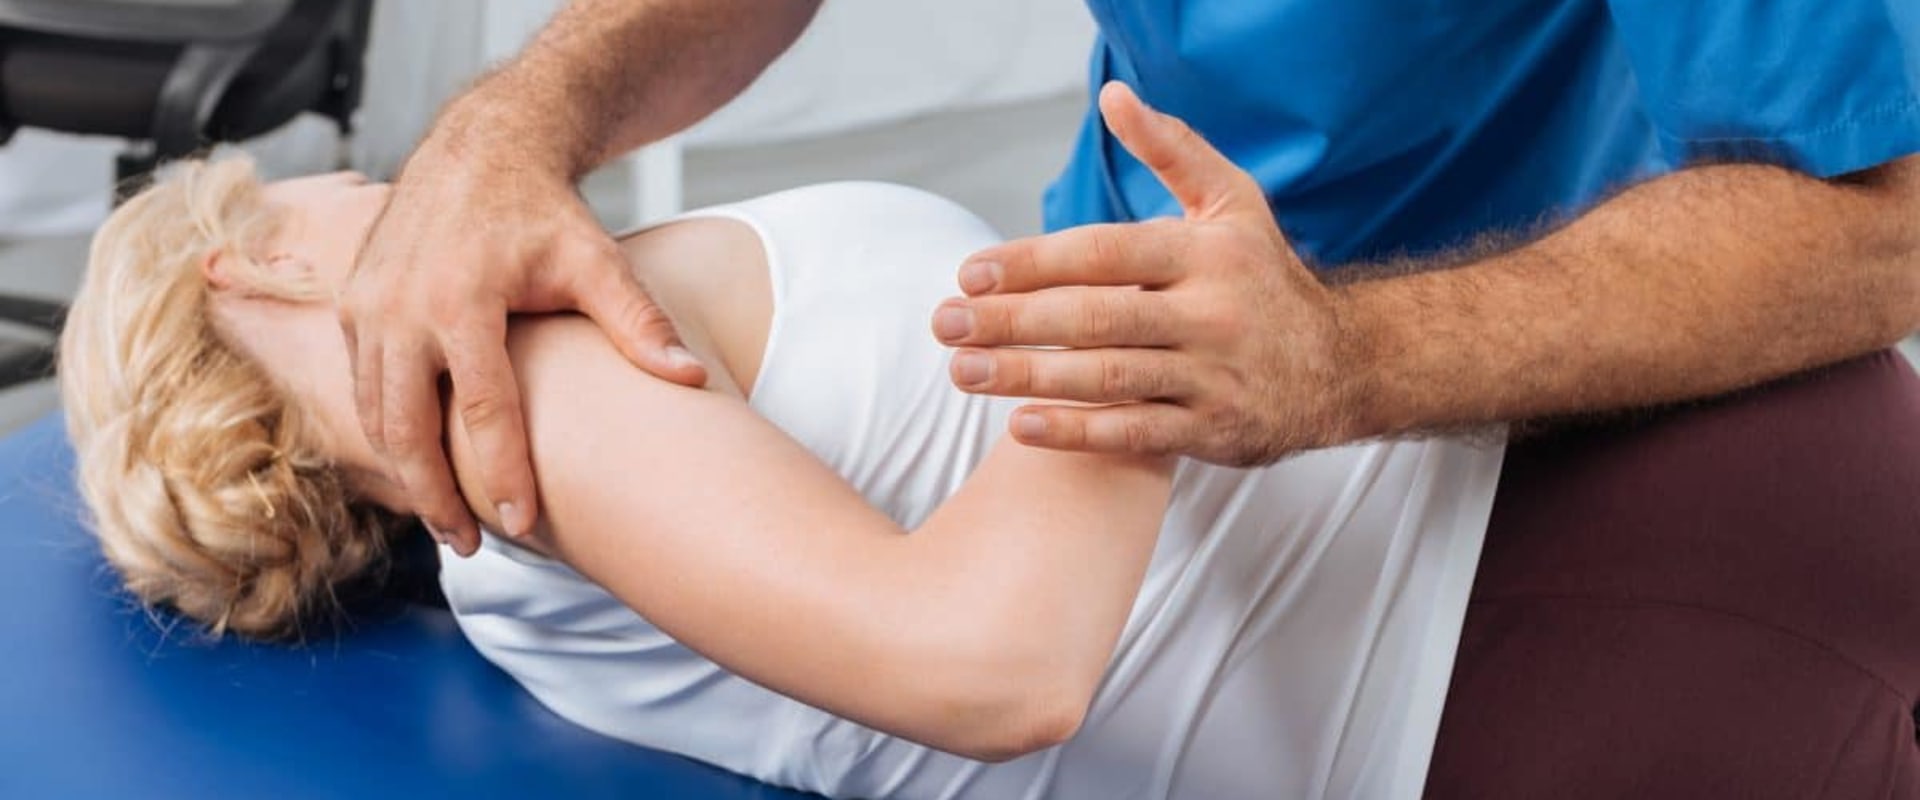 How Far Apart Should Chiropractic Adjustments Be? A Comprehensive Guide